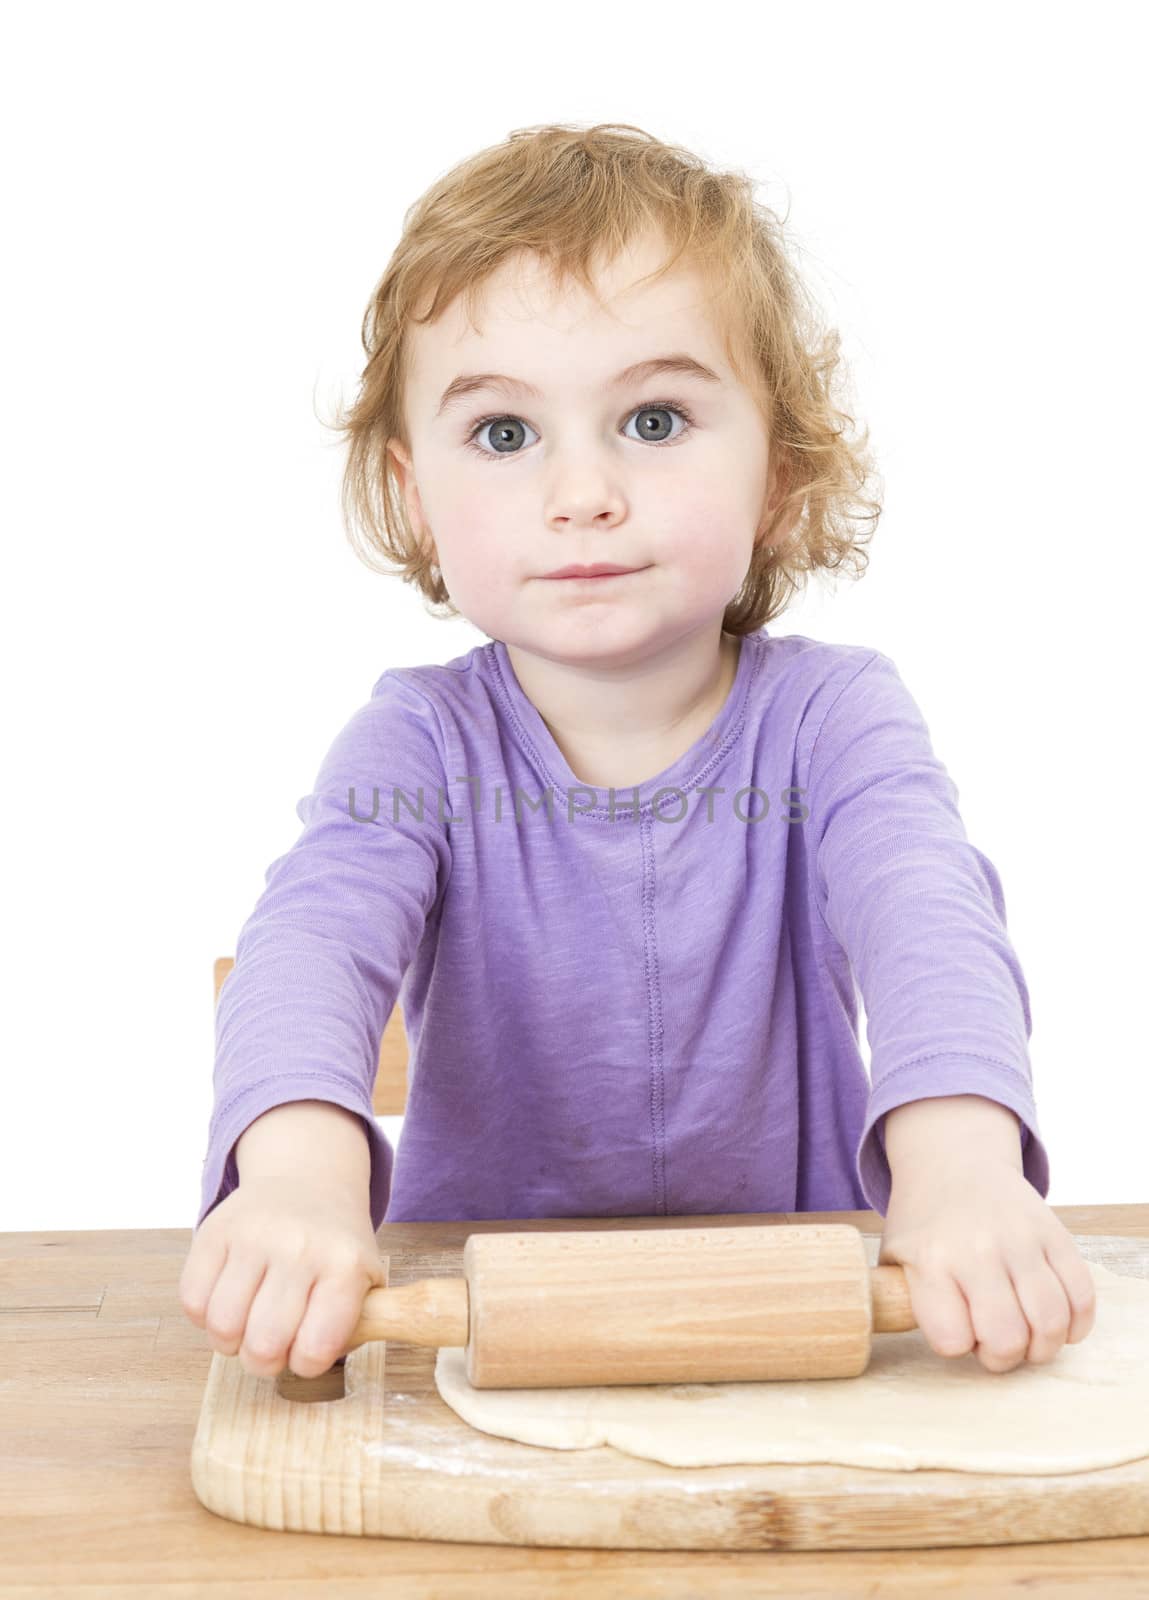 young child rolling out dough. isolated on white background